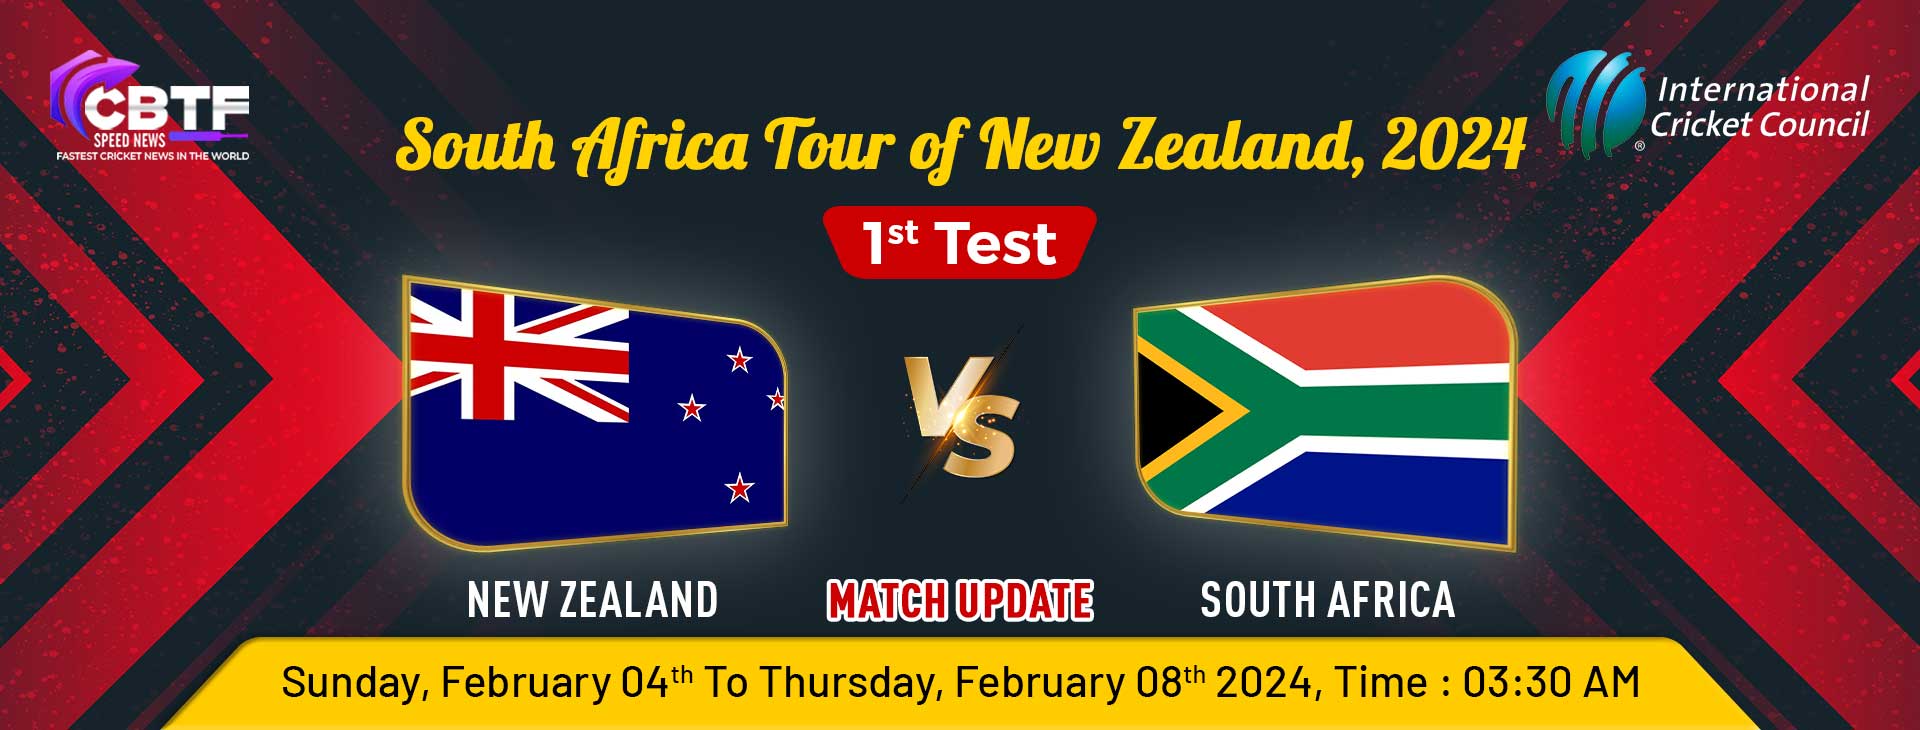 south africa tour of nz